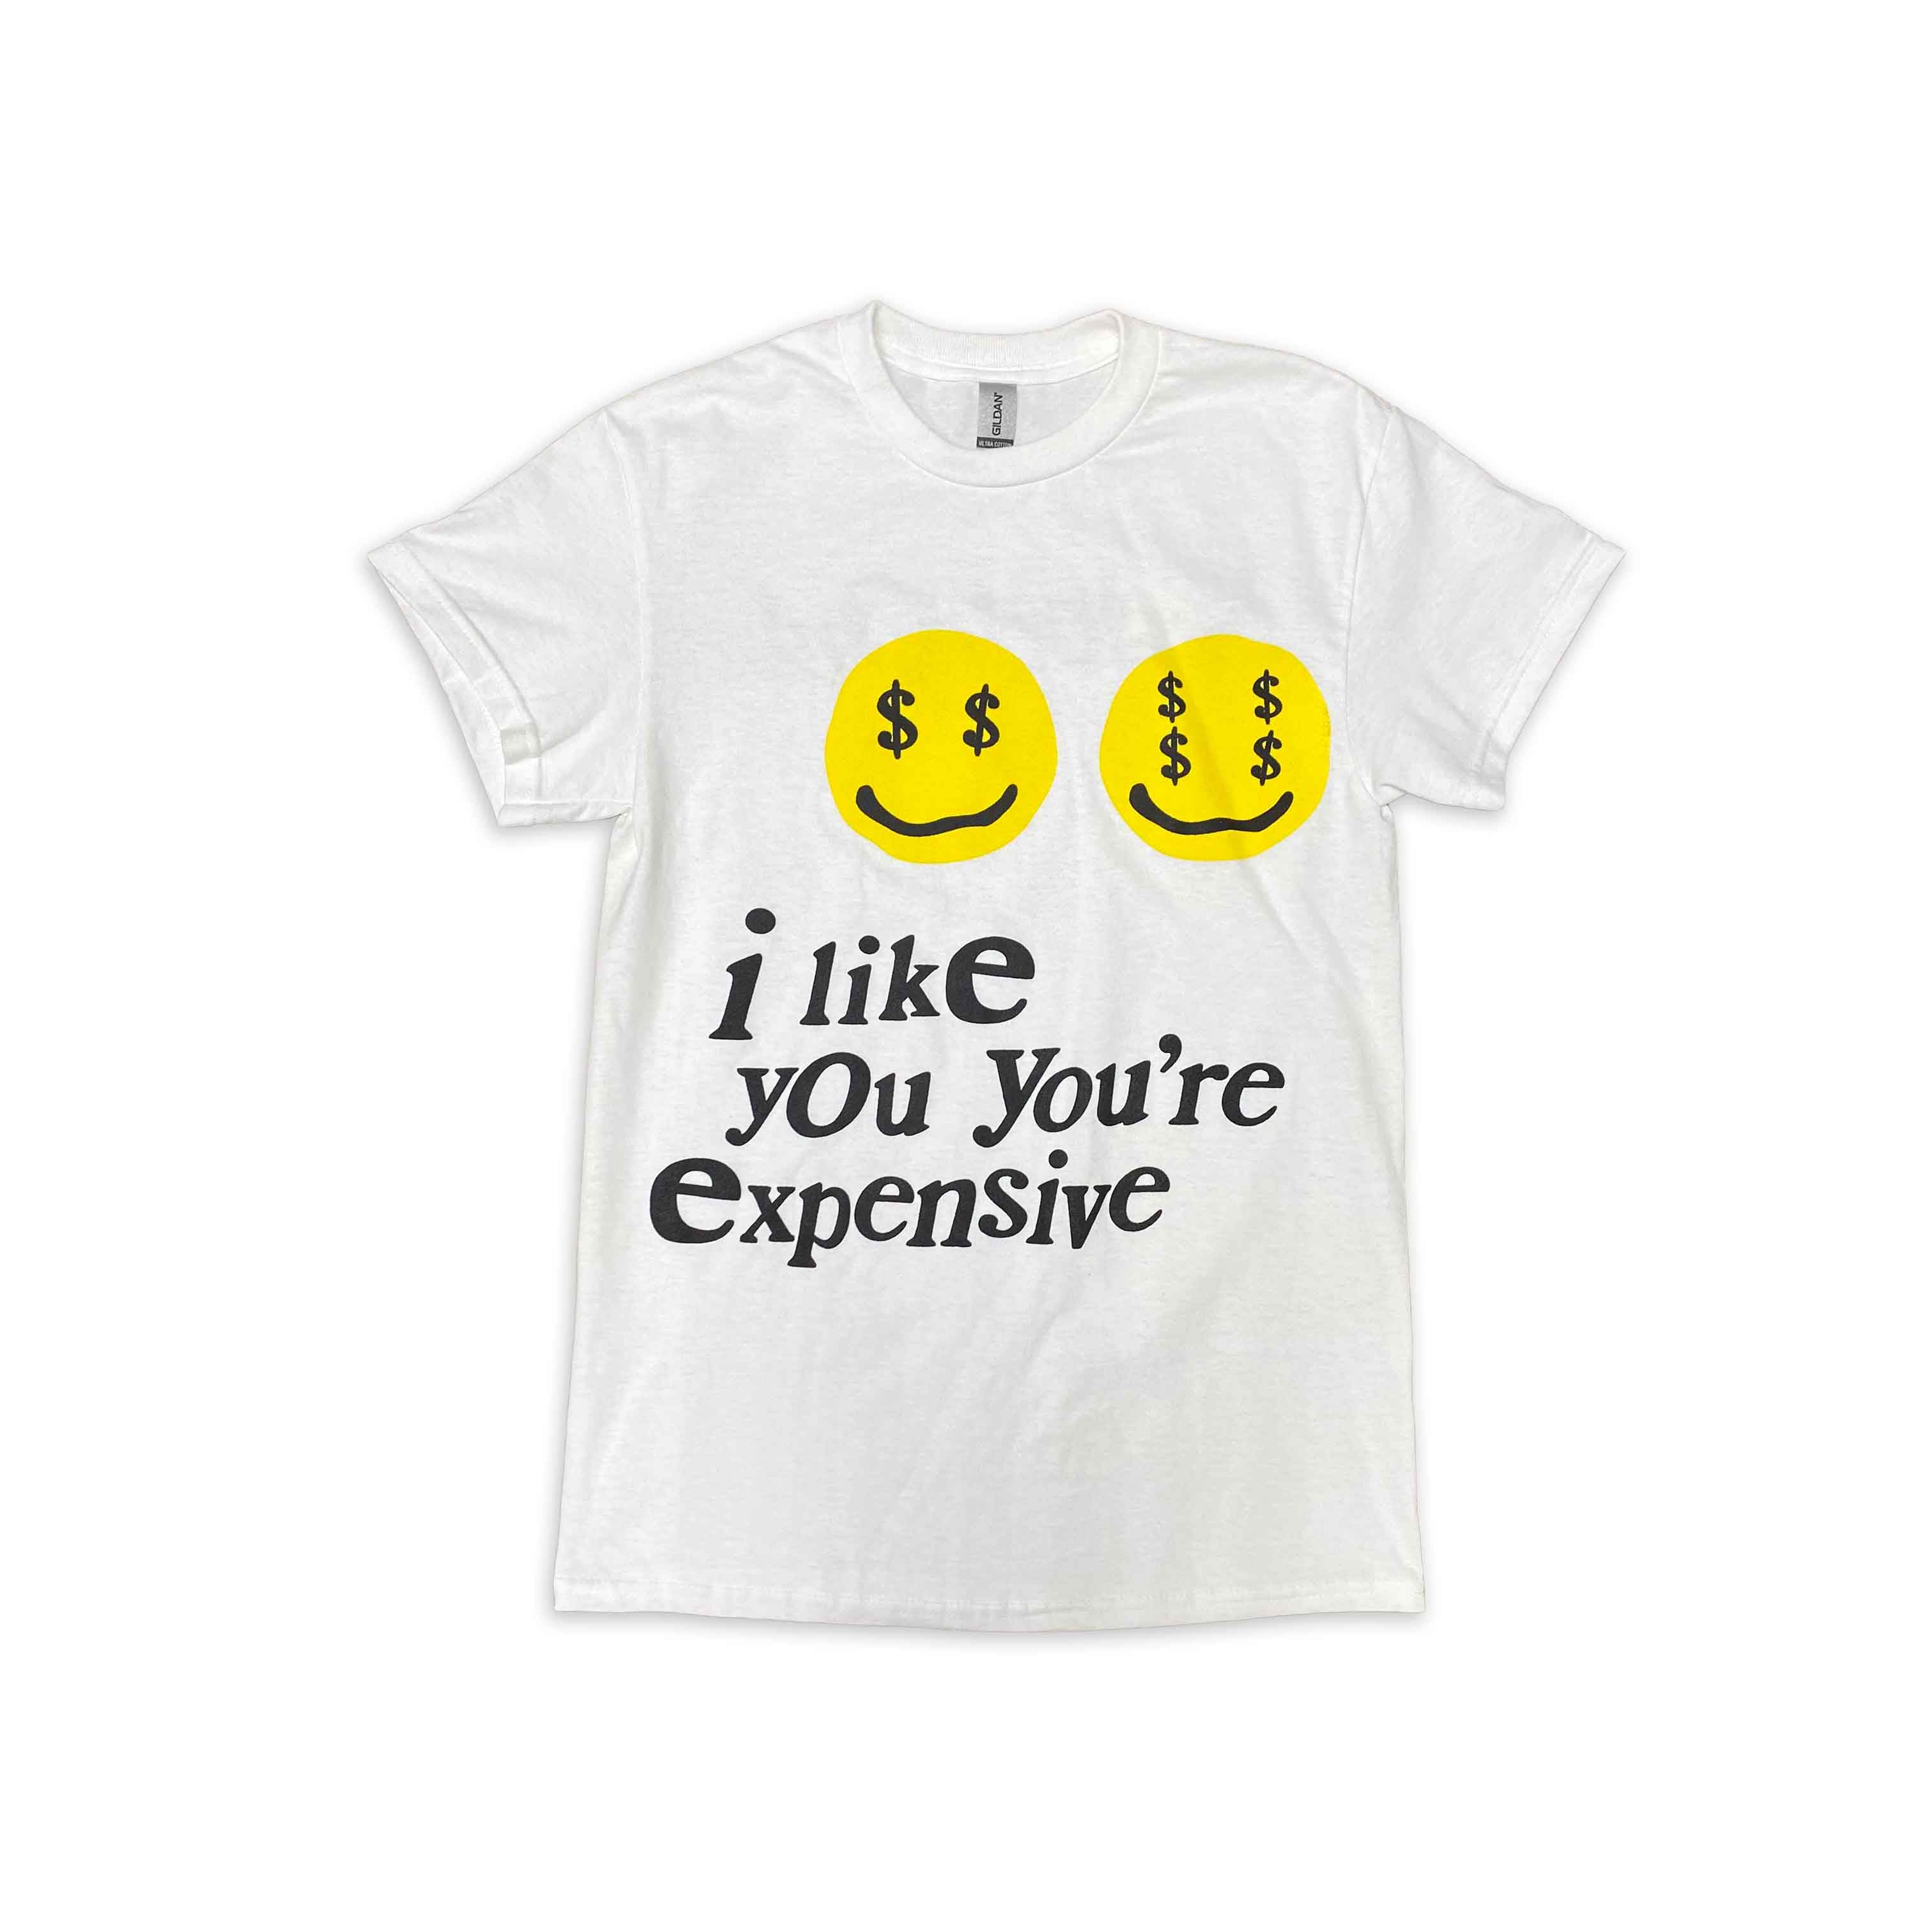 Soled Out T-Shirt &quot;EXPENSIVE&quot; White New Size M